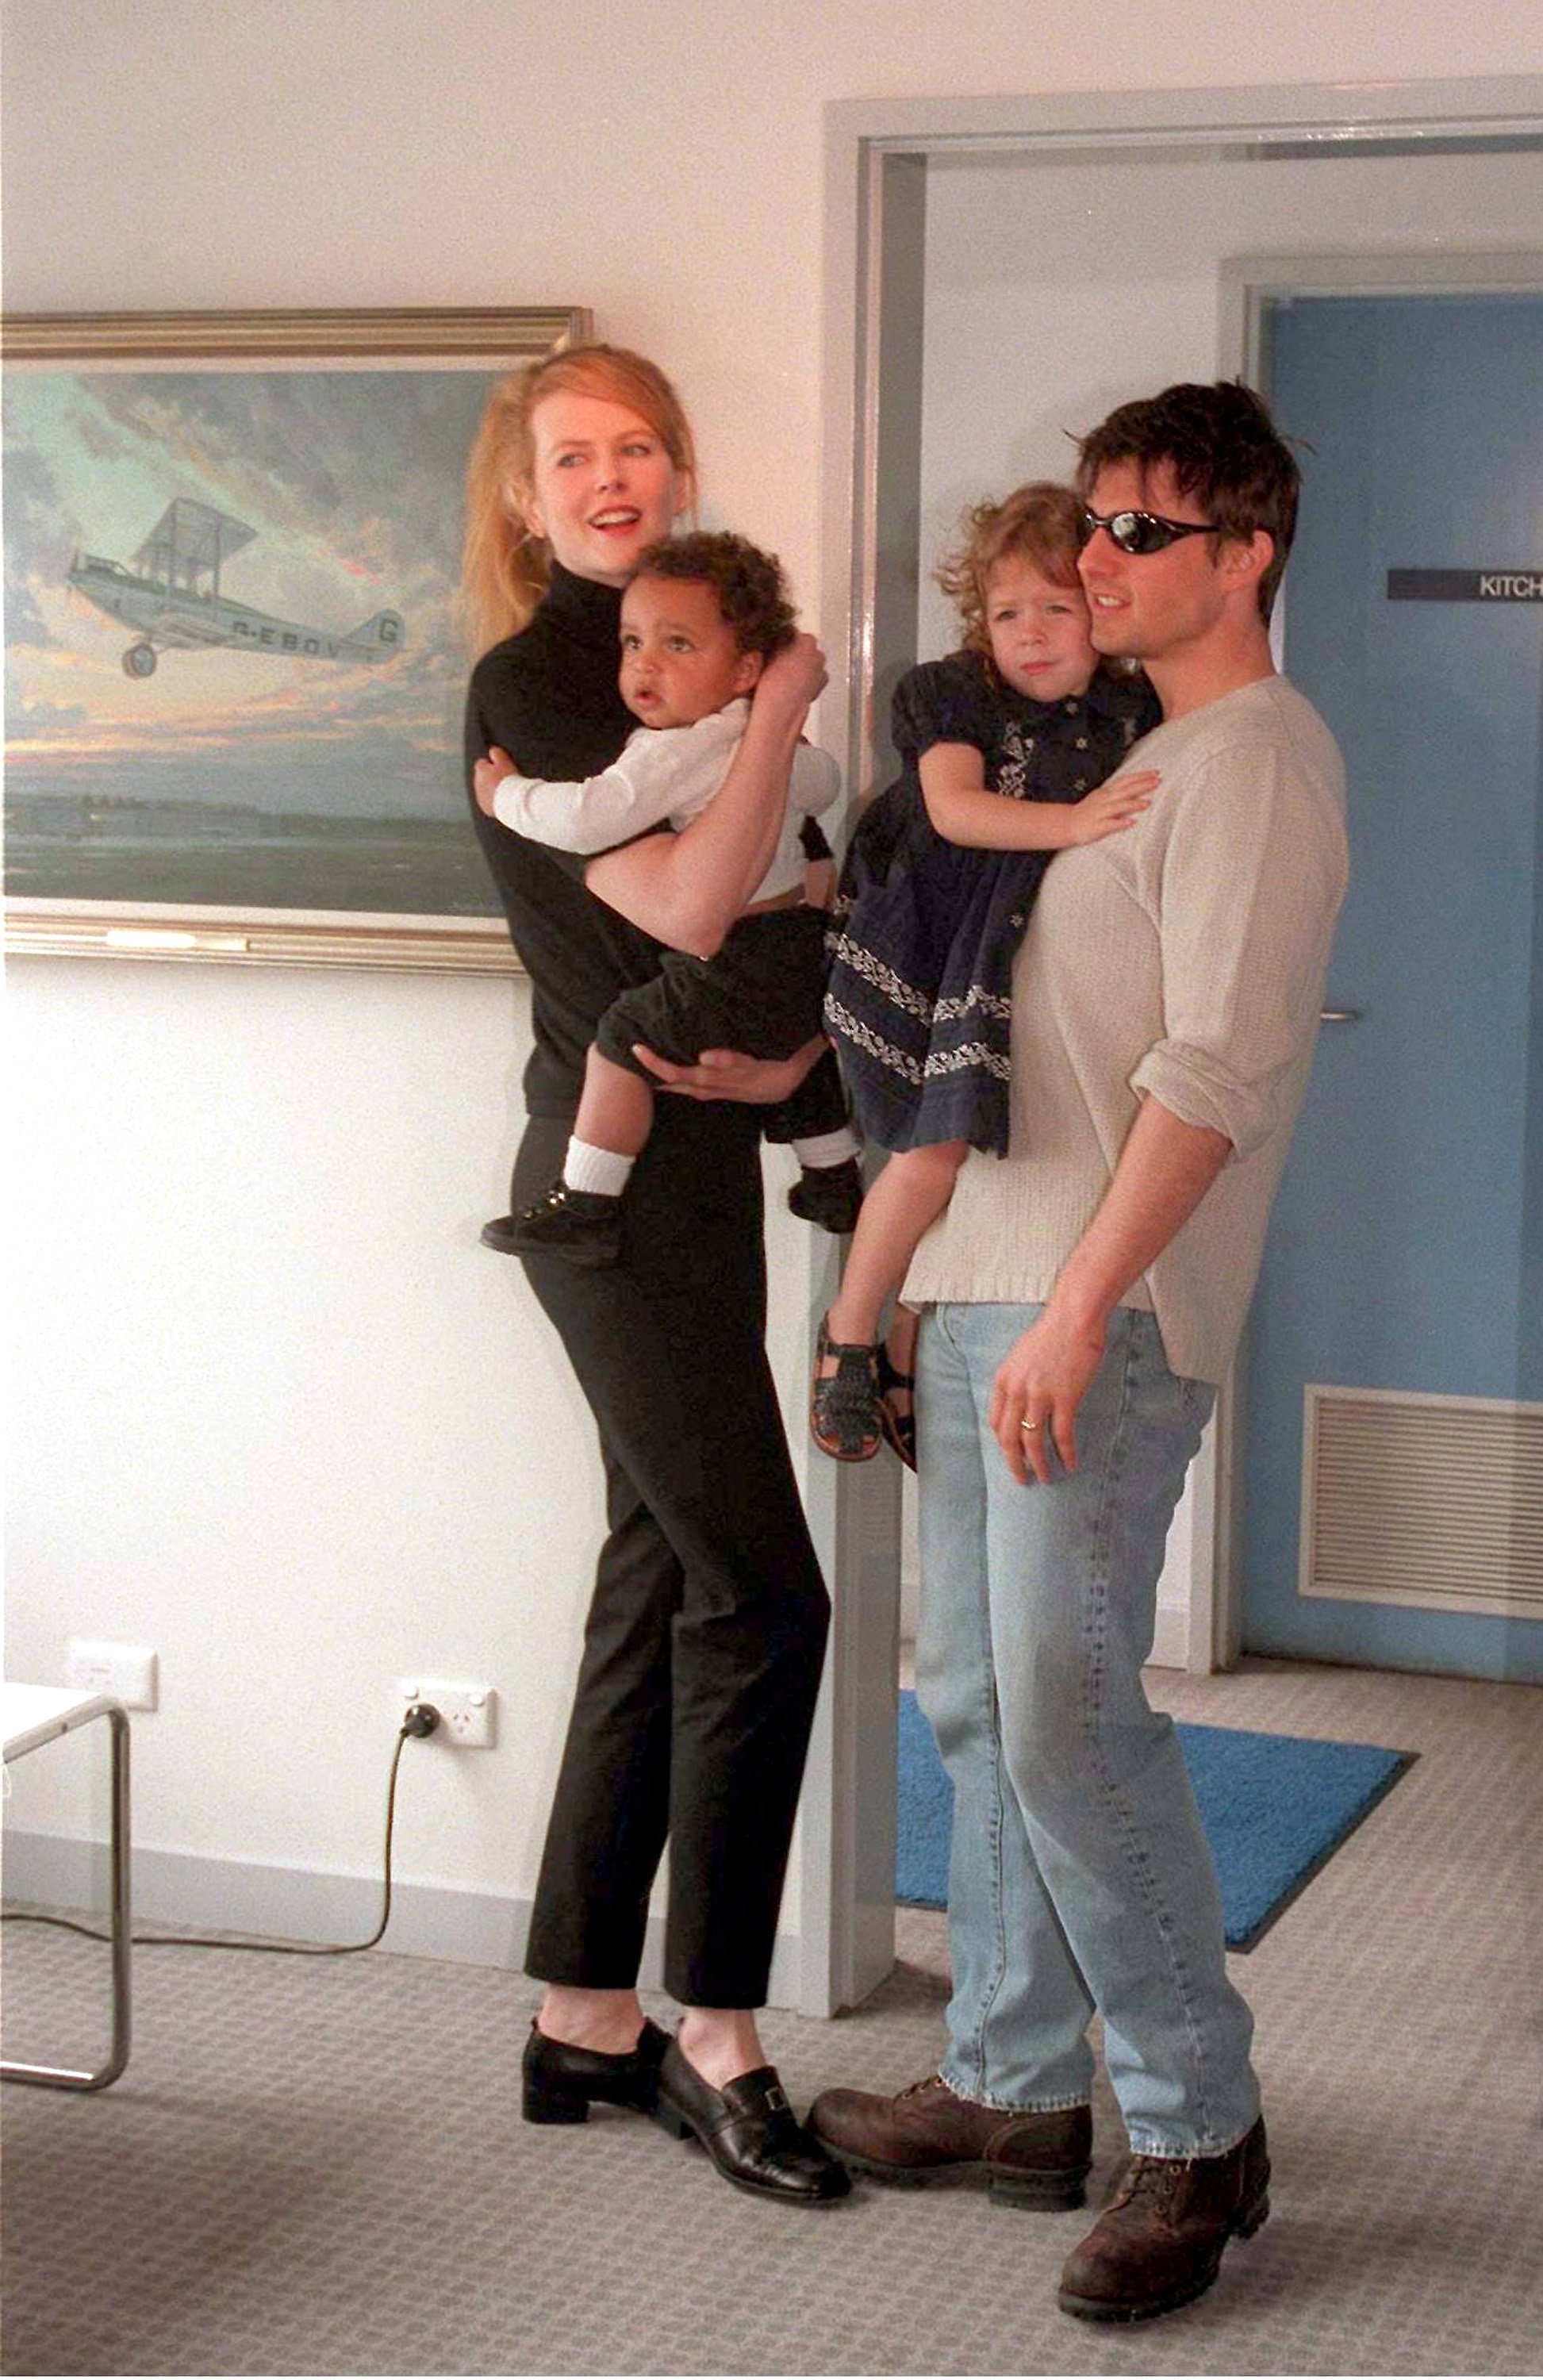 Nicole Kidman and Tom Cruise at Sydney Kingsford Smith airport to introduce their children Connor and Isabella to the media on January 24, 1996, in Sydney, Australia | Source: Getty Images